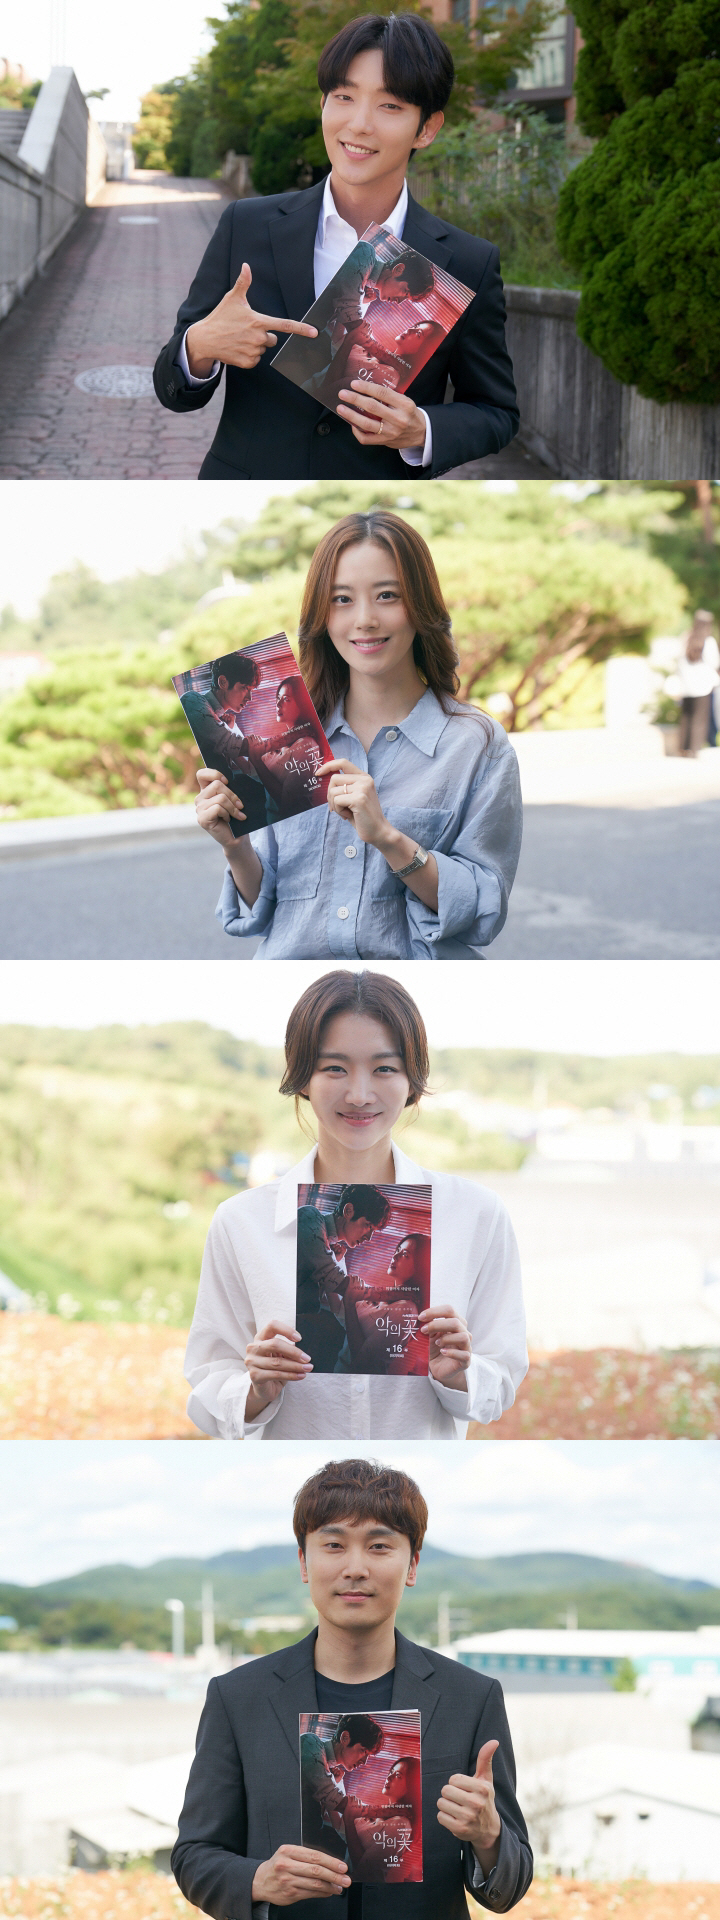 Lee Joon-gi, Moon Chae-won, Jang Hee-jin and Seo Hyeon-woo expressed their feelings ahead of the end of tvN Wednesday-Thursday evening drama Flower of Evil.TVN Wednesday-Thursday evening drama Flower of Evil (played by Yoo Jung-hee, directed by Kim Cheol-gyu) In the last broadcast, Do Hyun-soo (Lee Joon-gi) and Do Hae-soo (Jang Hee-jin), who was in danger of death, opened their eyes with two shots toward Baek Hee-sung (Kim Ji-hoon).Do Hae-su and Kim Moo-jin, as well as Do Hyun-soos melodrama of Cha JiWon (Moon Chae-won), are also raising explosive questions at the last meeting about what direction they will flow.As the attention of the hot viewers is concentrated more than ever, the protagonists of the Flower of Evil, which is playing a hot role in the drama, presented a special message to repay the love.Lee Joon-gi of Do Hyun-soo, who proved the class of Myeongbul-jeon first, said, All of the Flowers of Evil that have been running for the past seven months have been completed.In fact, when I first started, it felt difficult and I felt a lot of pressure to do well.I think I was able to finish well thanks to the bishop, the artist, the staff and my fellow actors who were together. I was able to finish with more power because there were viewers who enjoyed and supported the Flower of Evil together.Although every work has been done, Flower of Evil seems to have a long toxicity.I would like to express my sincere gratitude and love to all those who love Flower of Evil and Do Hyun-soo. Moon Chae-won, who wrote another life character as Cha JiWon, said: From warm spring to cool autumn, the fact that the flower of evil that spent three seasons together is about to end is not yet realized.I have done my best to shoot, so I think it will be remembered to me as a rewarding work more than ever. I sincerely thank the viewers who loved the drama.There were moments that were difficult and difficult as I wanted to express my feelings with the character Cha JiWon as true as possible.But thanks to the love that viewers sent me, I was able to overcome it well.It was a really happy time to meet all the staff including Kim Chul-gyu, Yoo Jung-hee, and fellow actors with good works.I would like to ask for your interest and expectation for the flower of evil until the end. He did not forget the sense of encouraging the shooter.Jang Hee-jin of Dohaesu Station, who had a stronger heart than anyone else in a thin atmosphere, said, It was a happy time to receive an unexpected big love.I would like to express my sincere gratitude to all the people who made it together and the viewers who have been begging.Tonight, the last episode of Flower of Evil is finally broadcast, and I hope you will be with me until the end. Seo Hyeon-woo, who has proved the genre-unlimited acting spectrum in the role of Kim Moo-jin, also said, Thanks to the hot love and interest of the viewers, I think I was able to finish my efforts with the staff and safety.I hope that the viewers will be able to work hard and that the flower of evil will be a sincere comfort to rest for a while in a difficult situation. Thank you. On the other hand, Baek Hee-sung (Do Hyun-soo), a man who played love, and his wife Cha JiWon, who started to doubt his reality, and the final page of the high-density emotional tracking drama of two people facing the truth that they want to ignore can be seen at the last episode of tvN Wednesday-Thursday evening drama Flower of Evil at 10:50 pm on the 23rd.